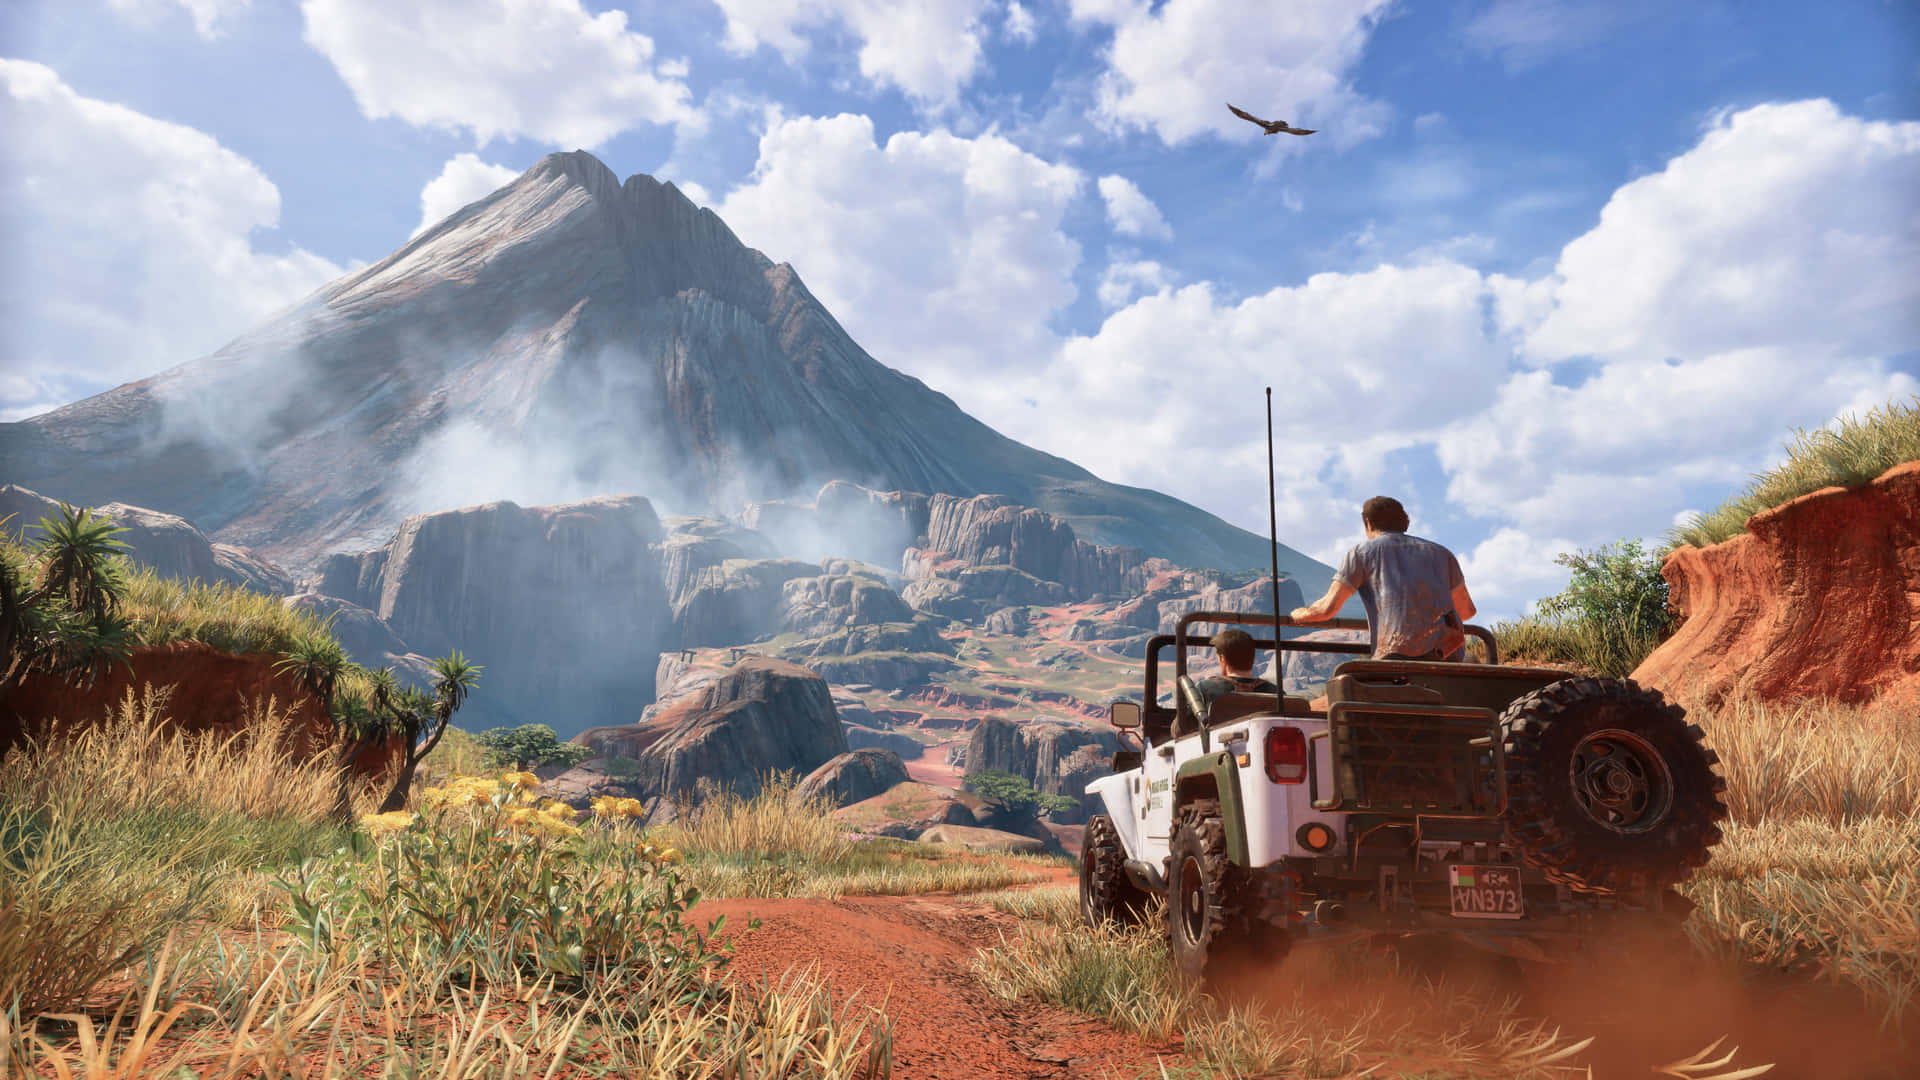 100+] Uncharted 4 Wallpapers